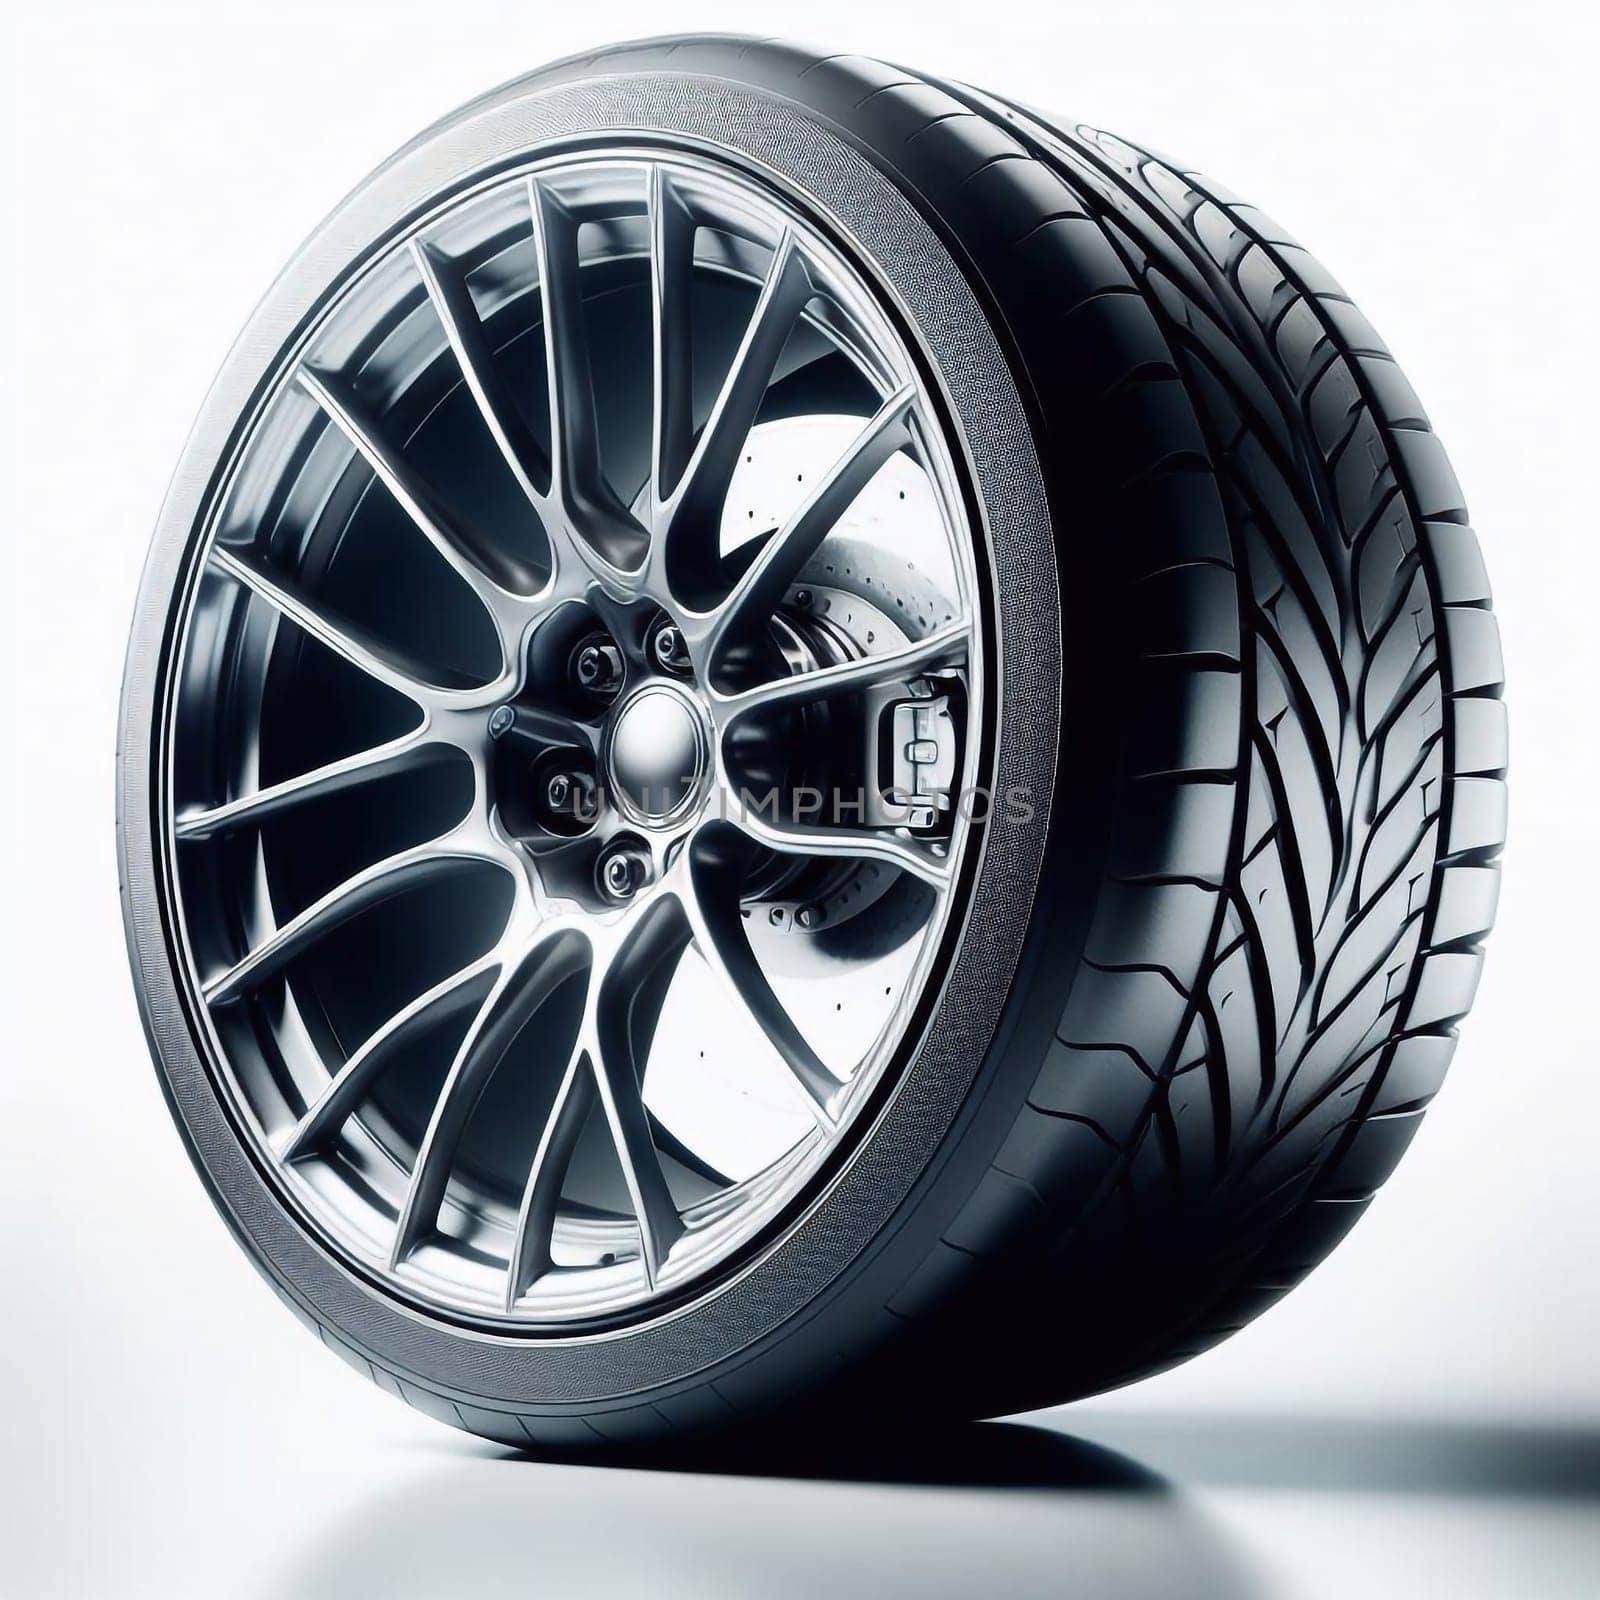 Sports car wheel for automobile companies by architectphd